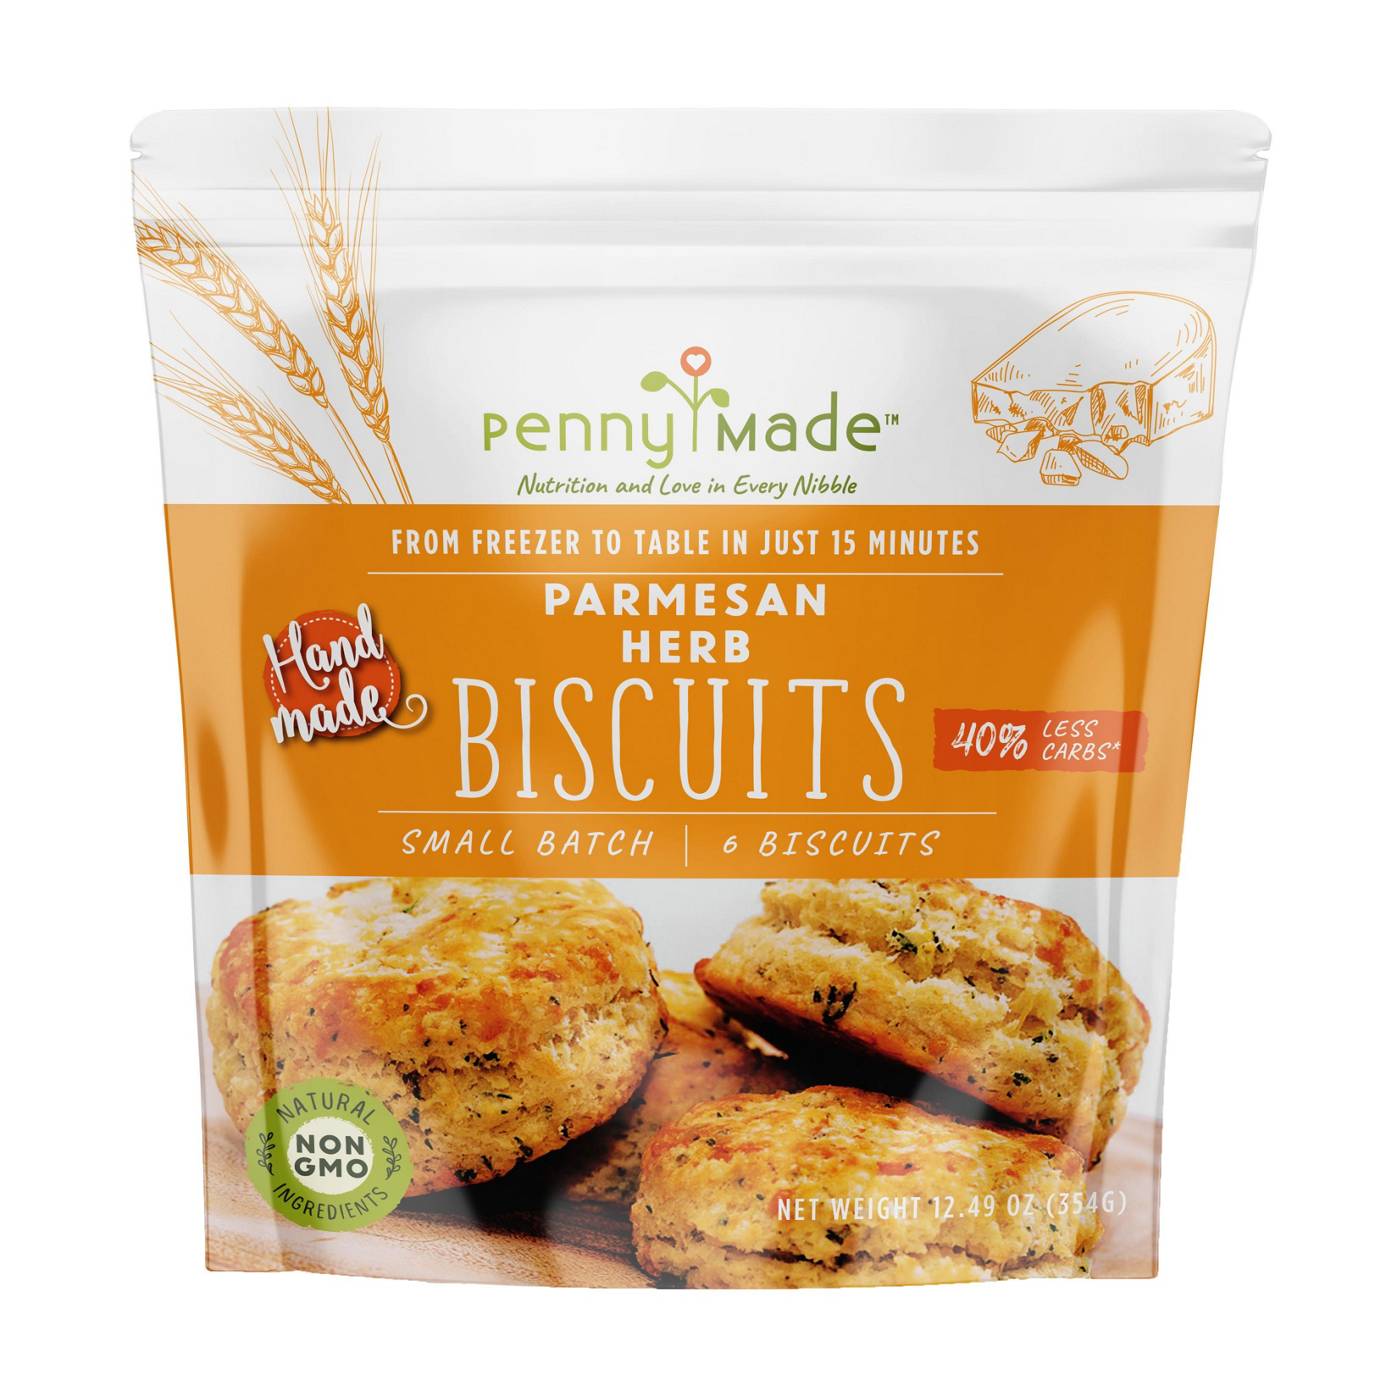 Pennymade Parmesan Herb Biscuits; image 1 of 2